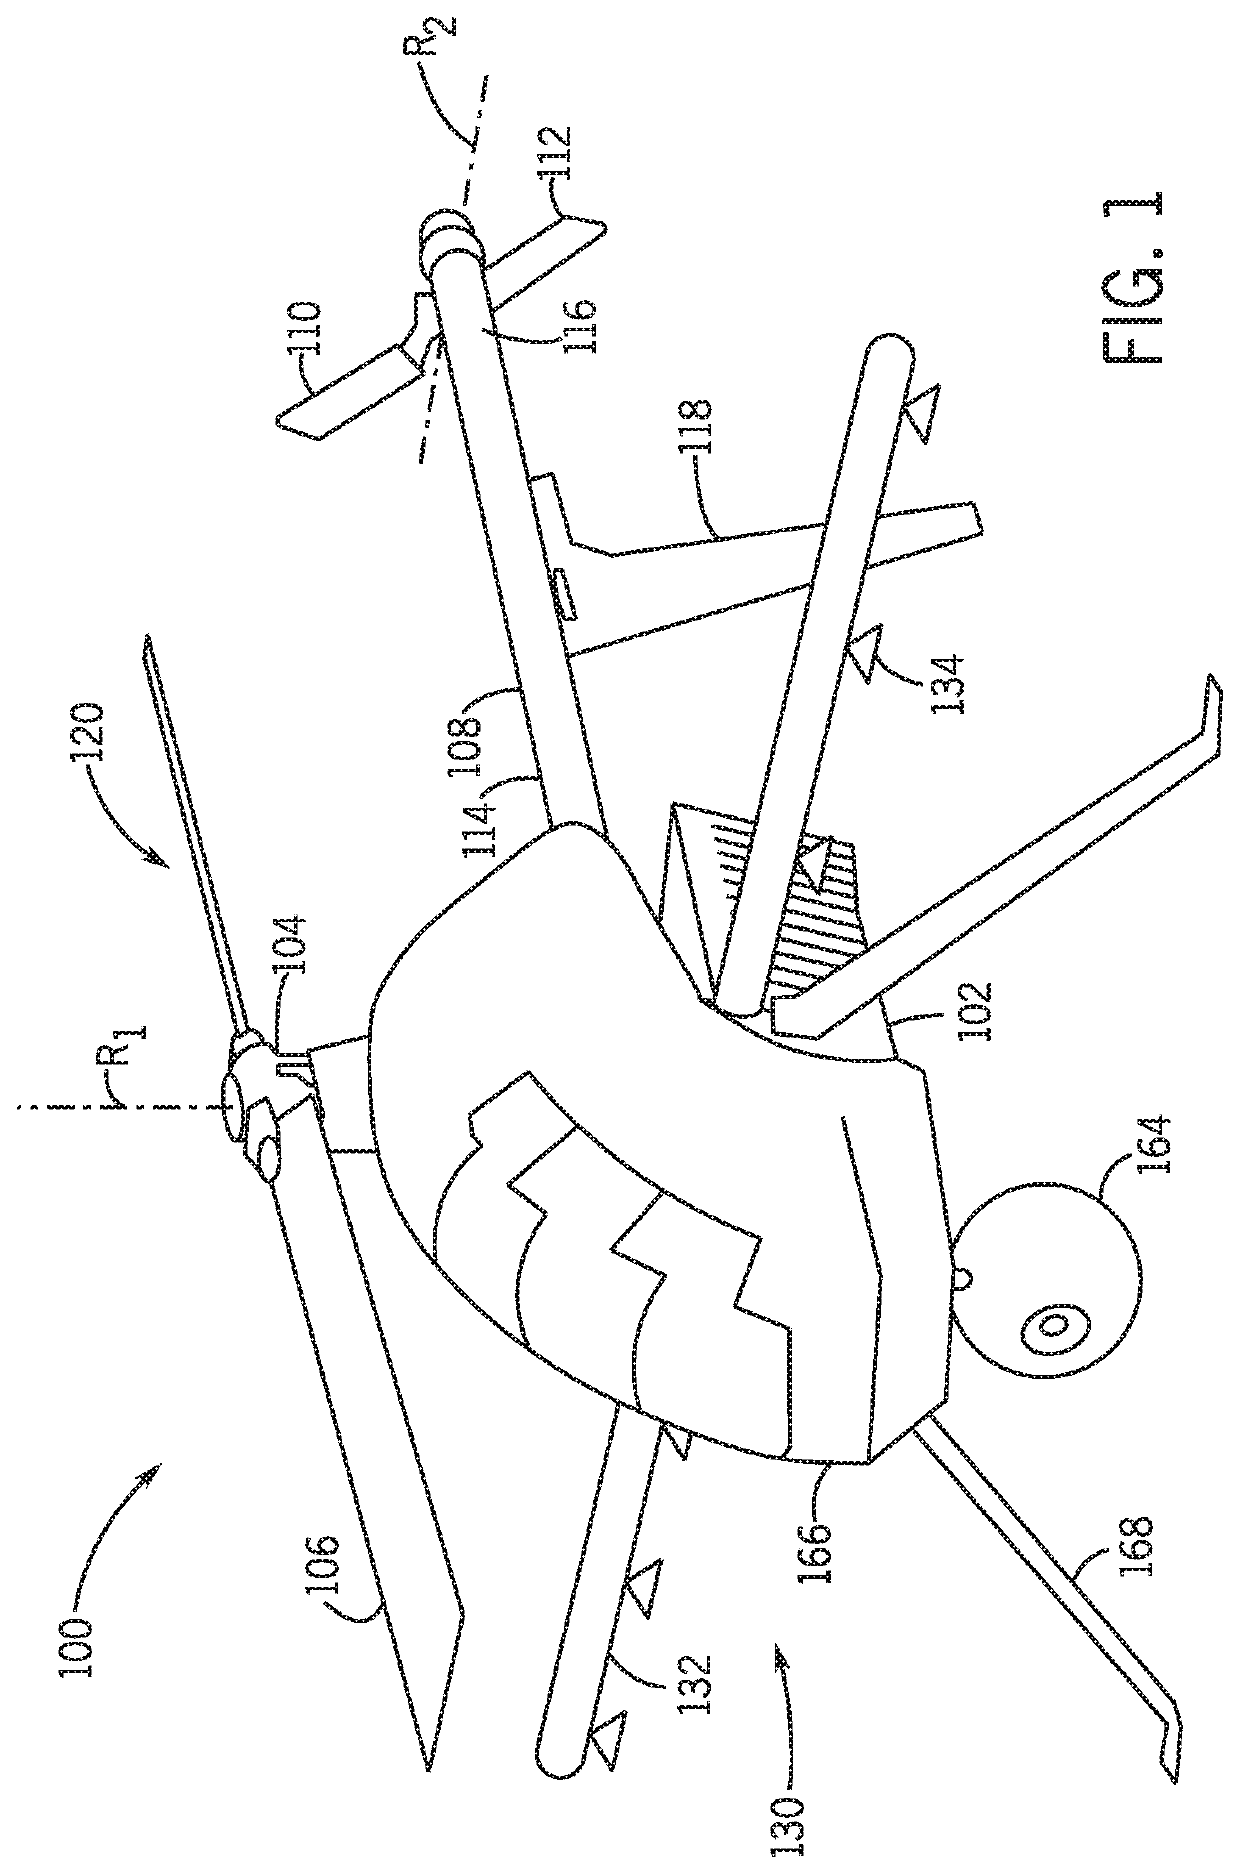 Disbursement system for an unmanned aerial vehicle